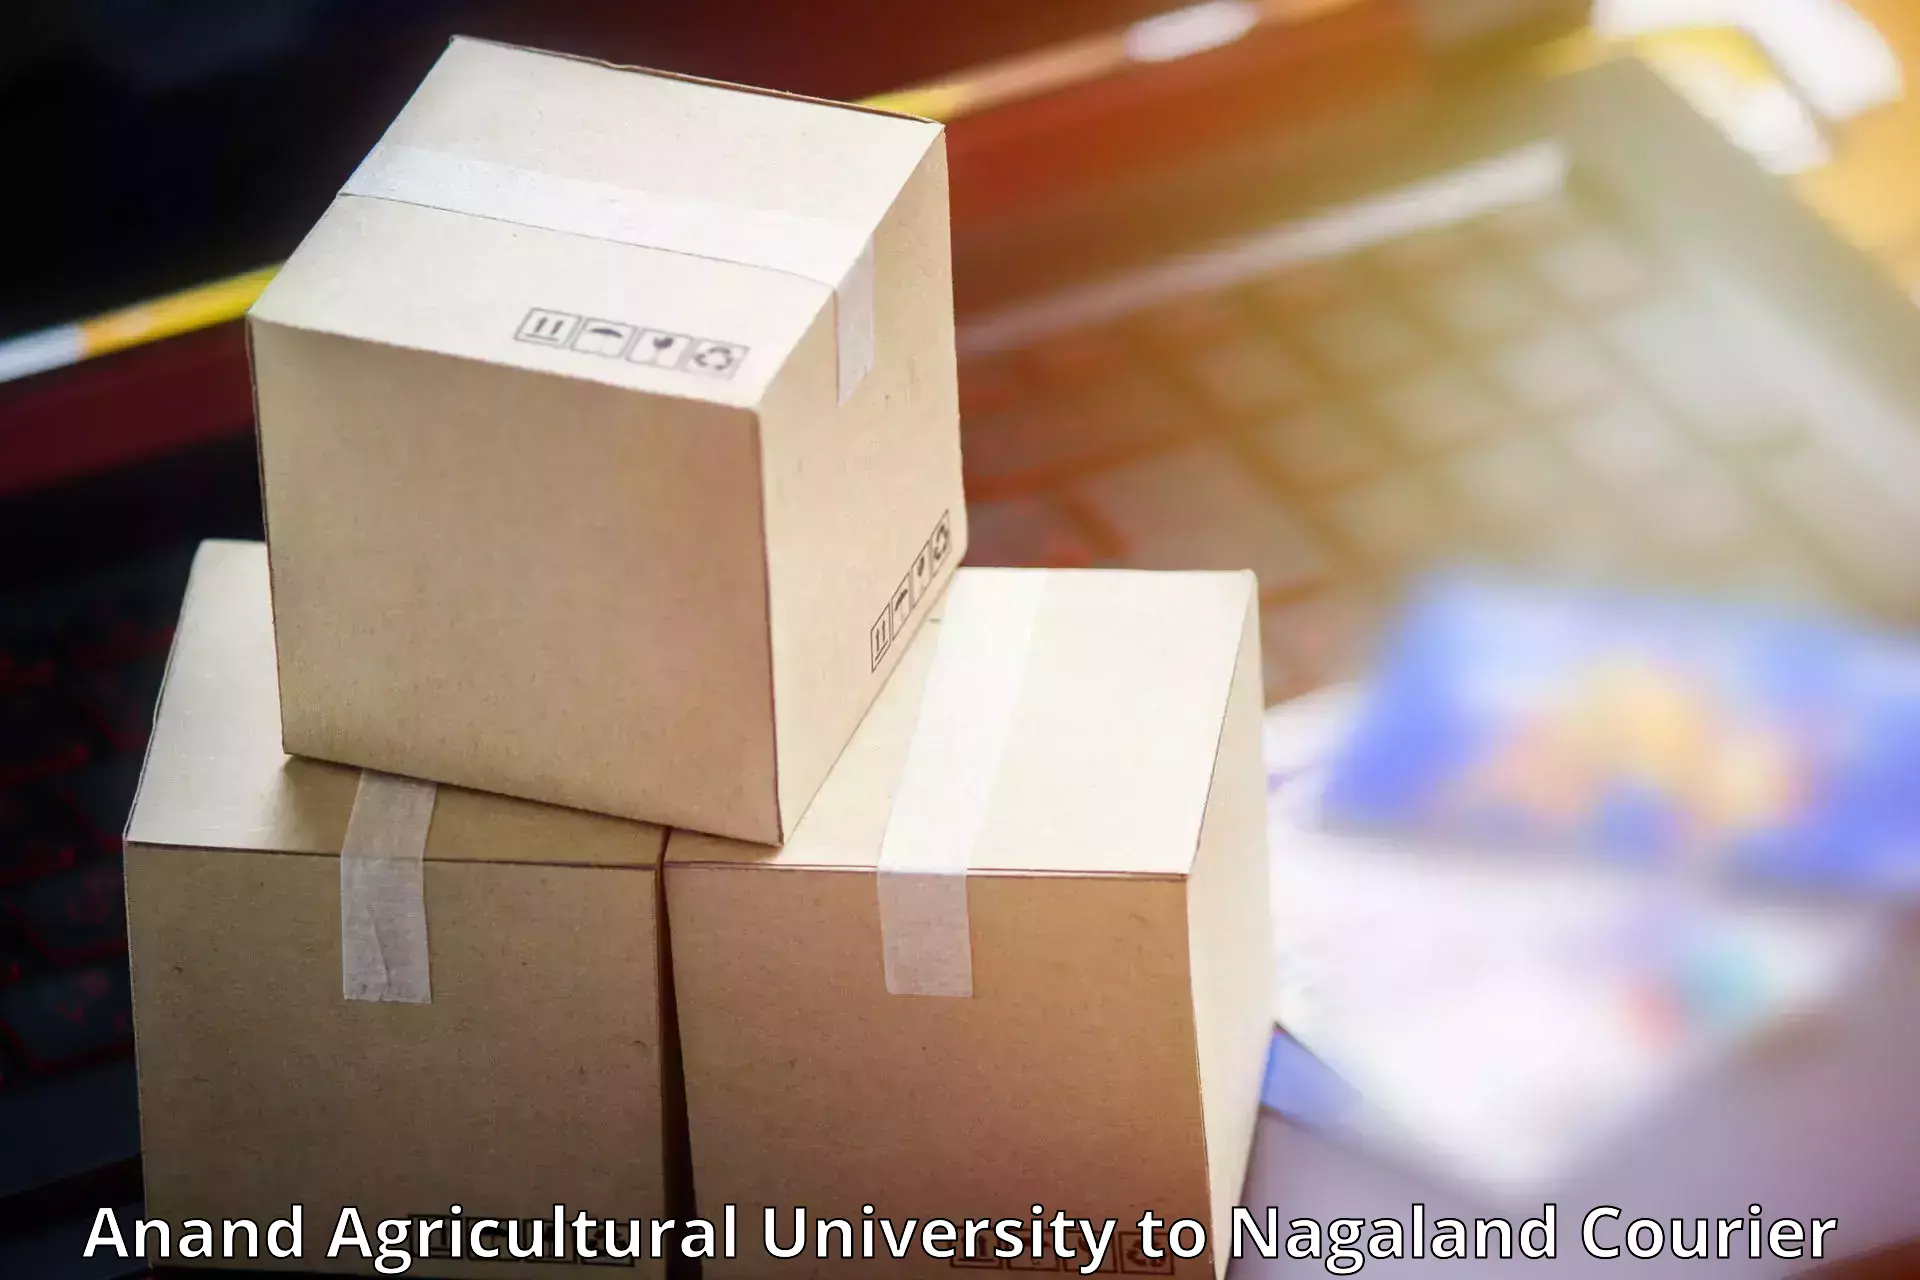 Courier service partnerships Anand Agricultural University to Nagaland